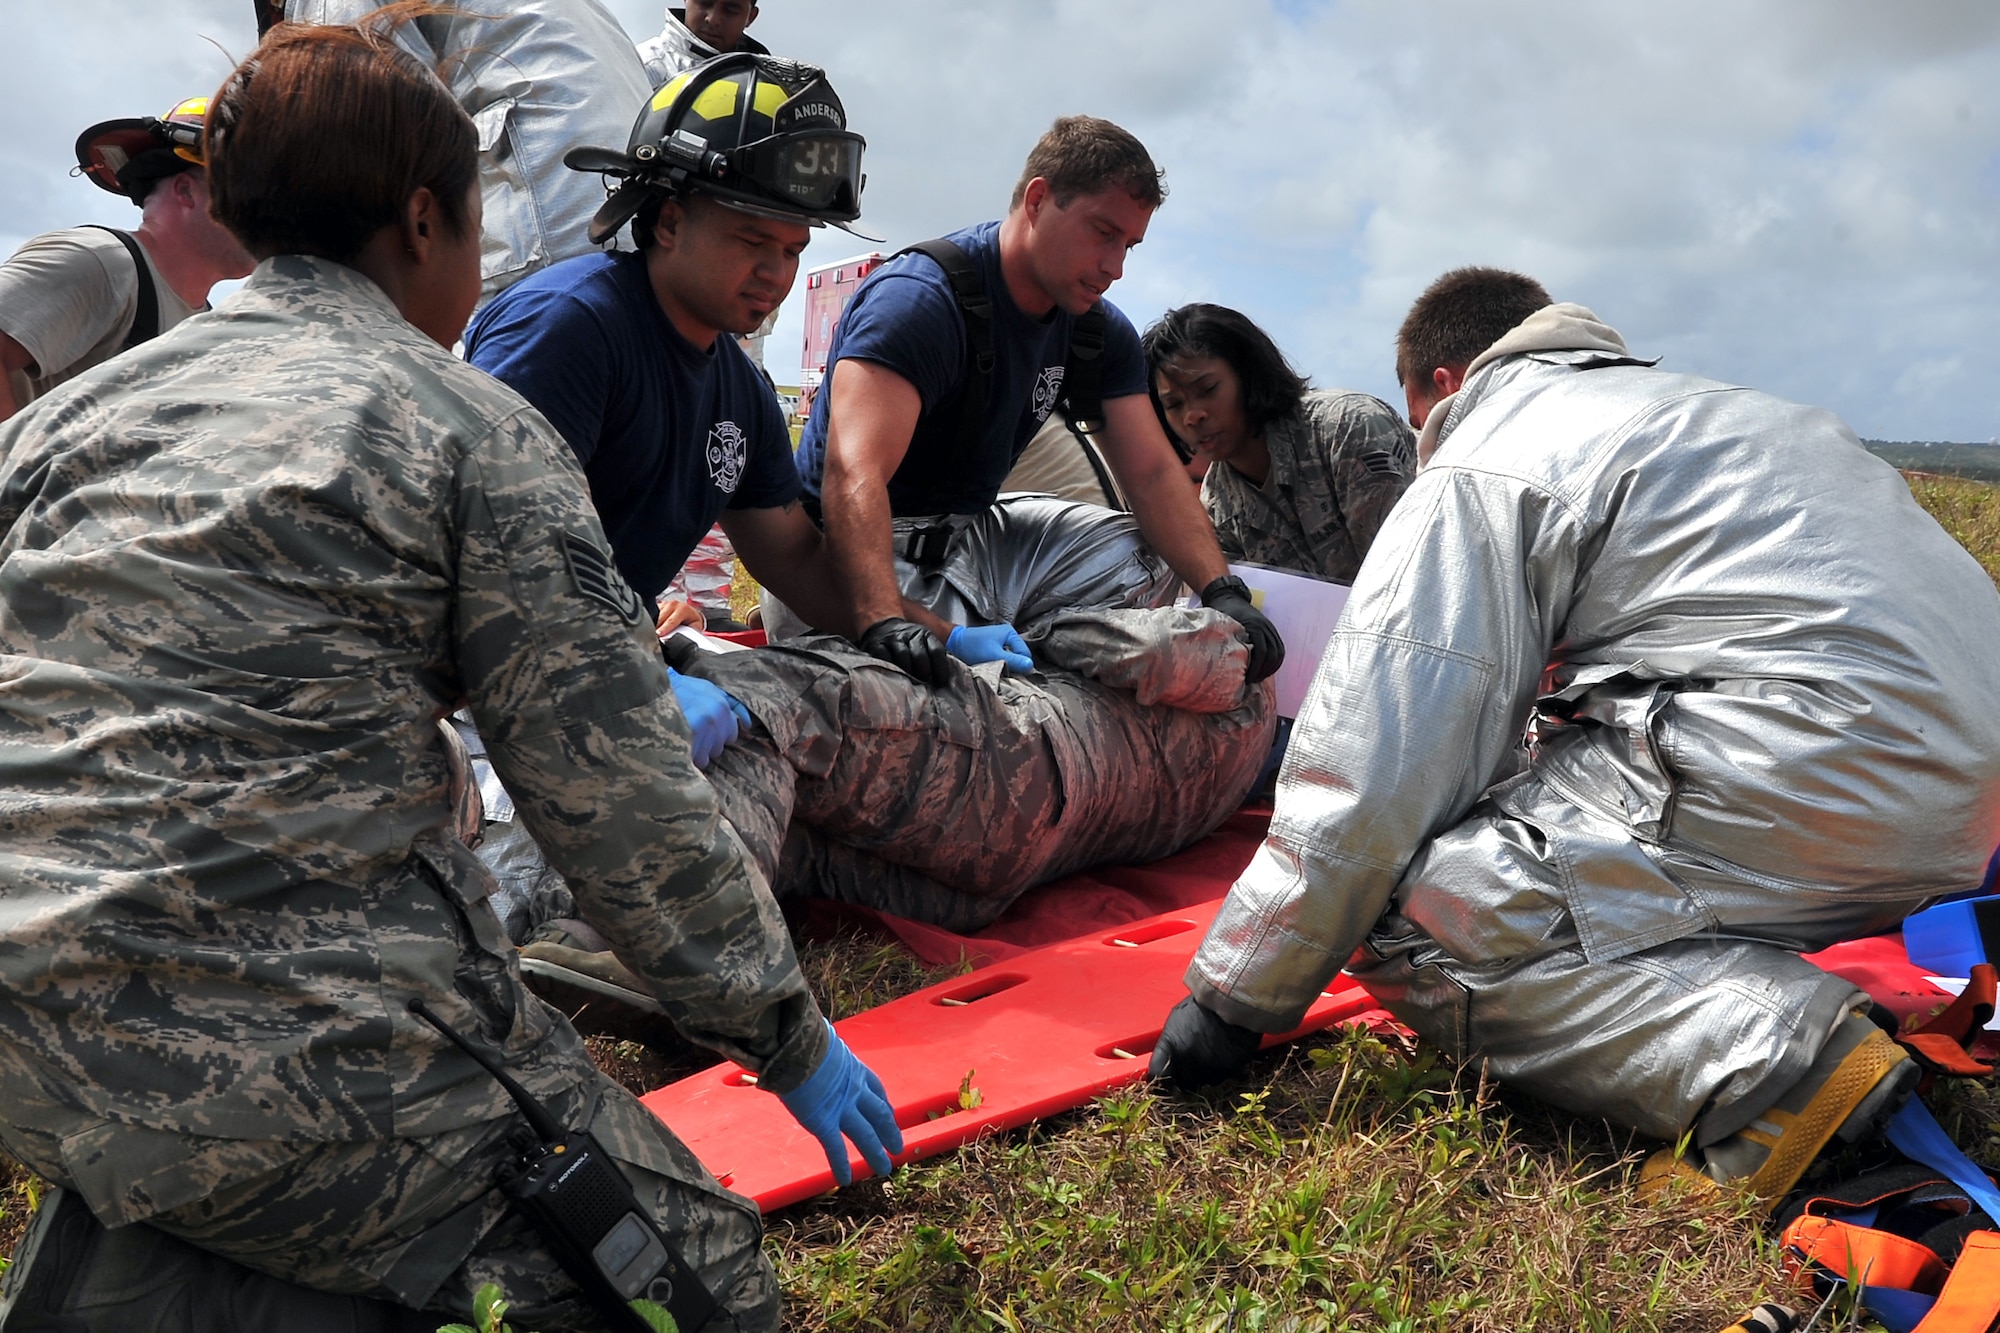 Emergency responders from the 36th Medical Operations Squadron and 36th Civil Engineer Squadron move a simulated patient onto a spine board during an exercise scenario on Andersen Air Force Base, Guam, April 14, 2014. Andersen performs operational readiness exercises regularly to ensure Airmen and their families remain ready to respond quickly and accurately in the event of a real-world situation. (U.S. Air Force photo by Staff Sgt. Melissa B. White/Released)